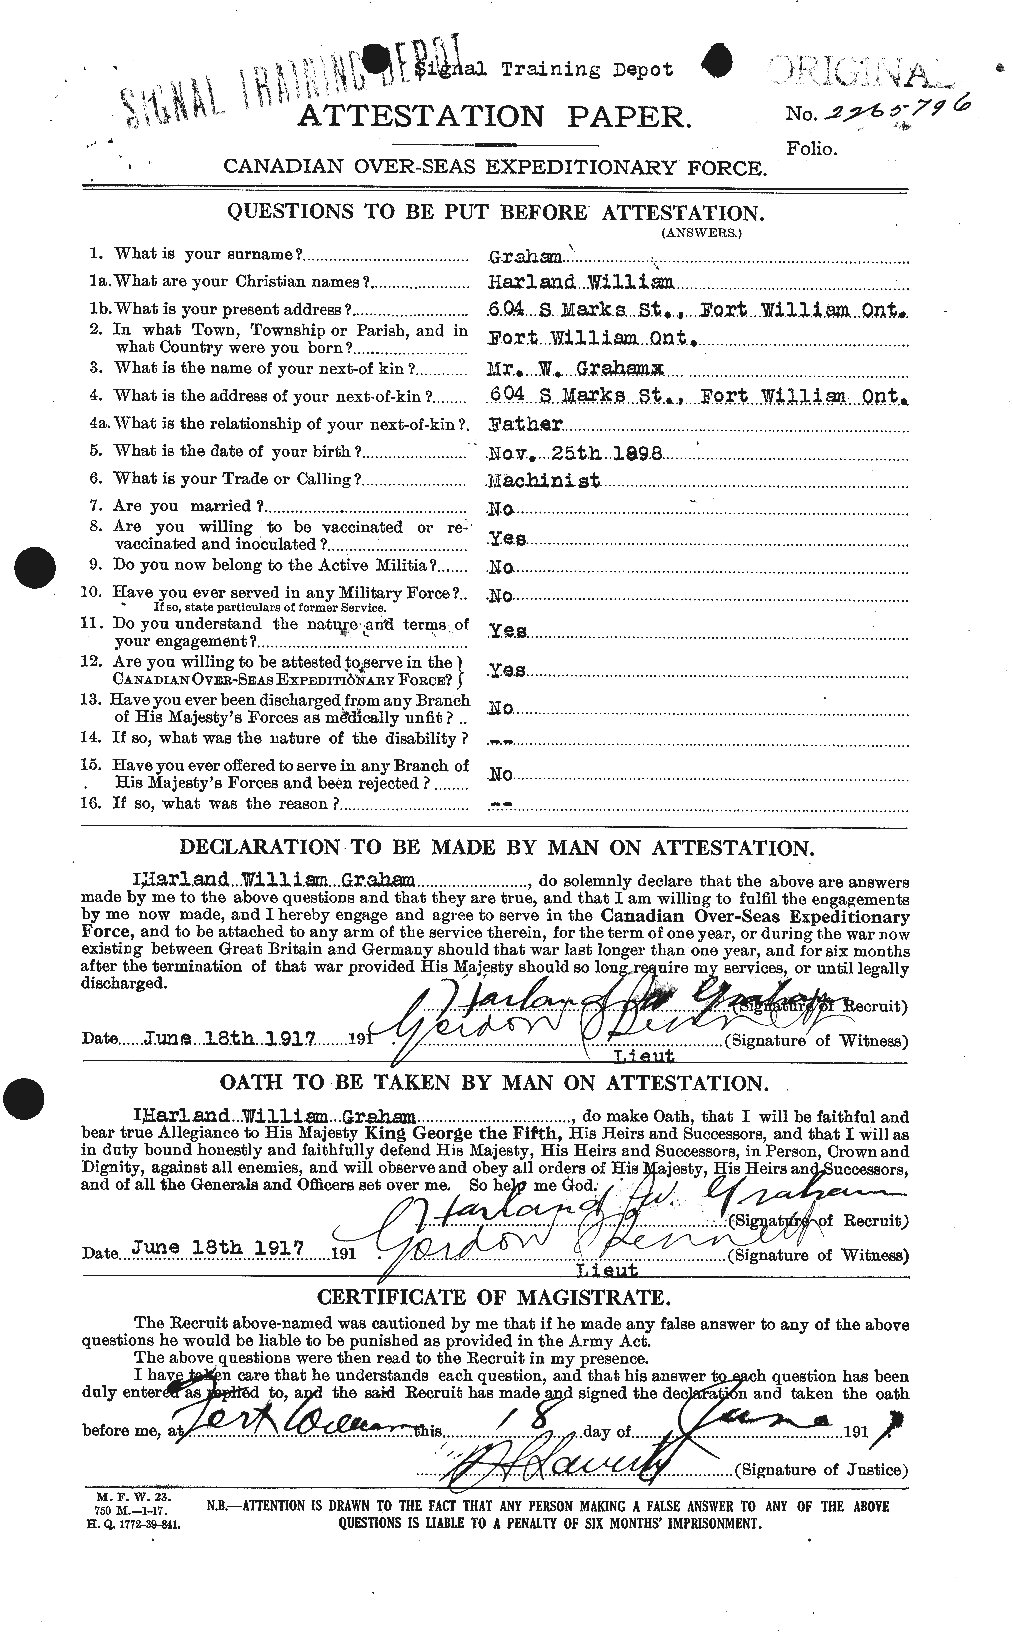 Personnel Records of the First World War - CEF 357692a